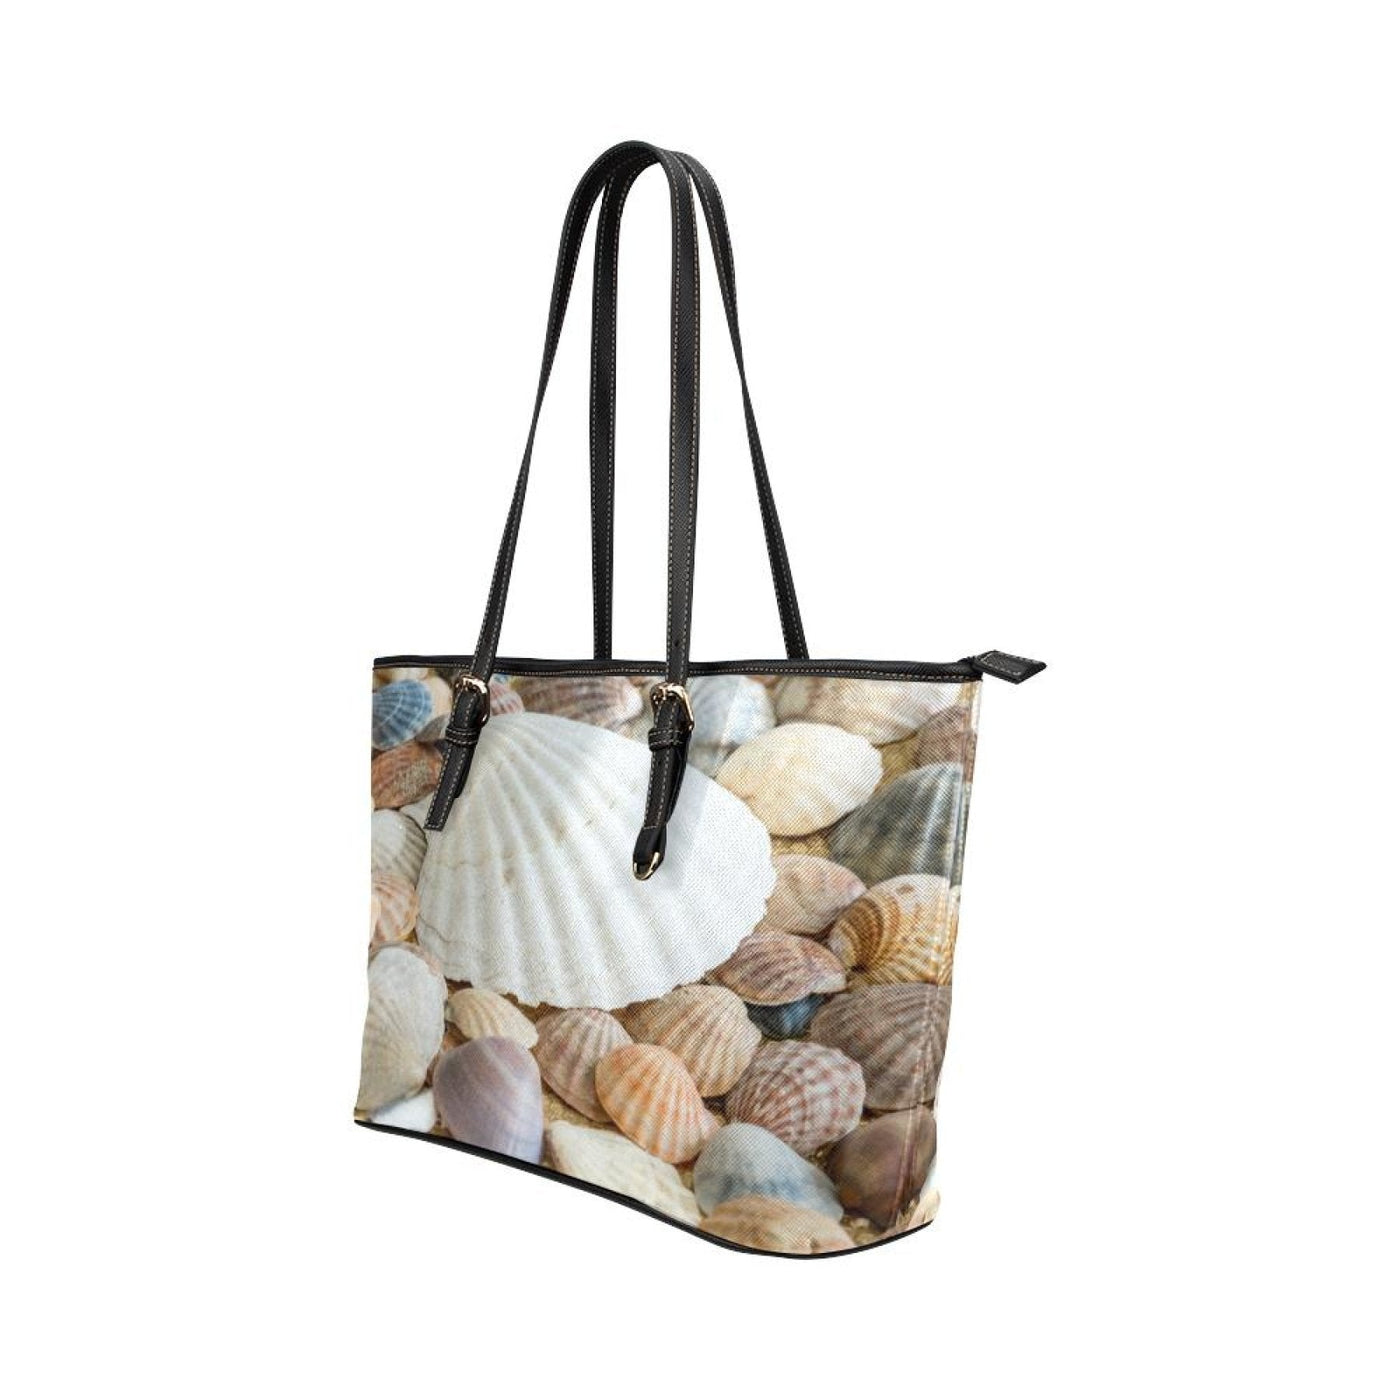 Large Leather Tote Shoulder Bag - Clam Sea Life B4130898 - Bags | Leather Tote